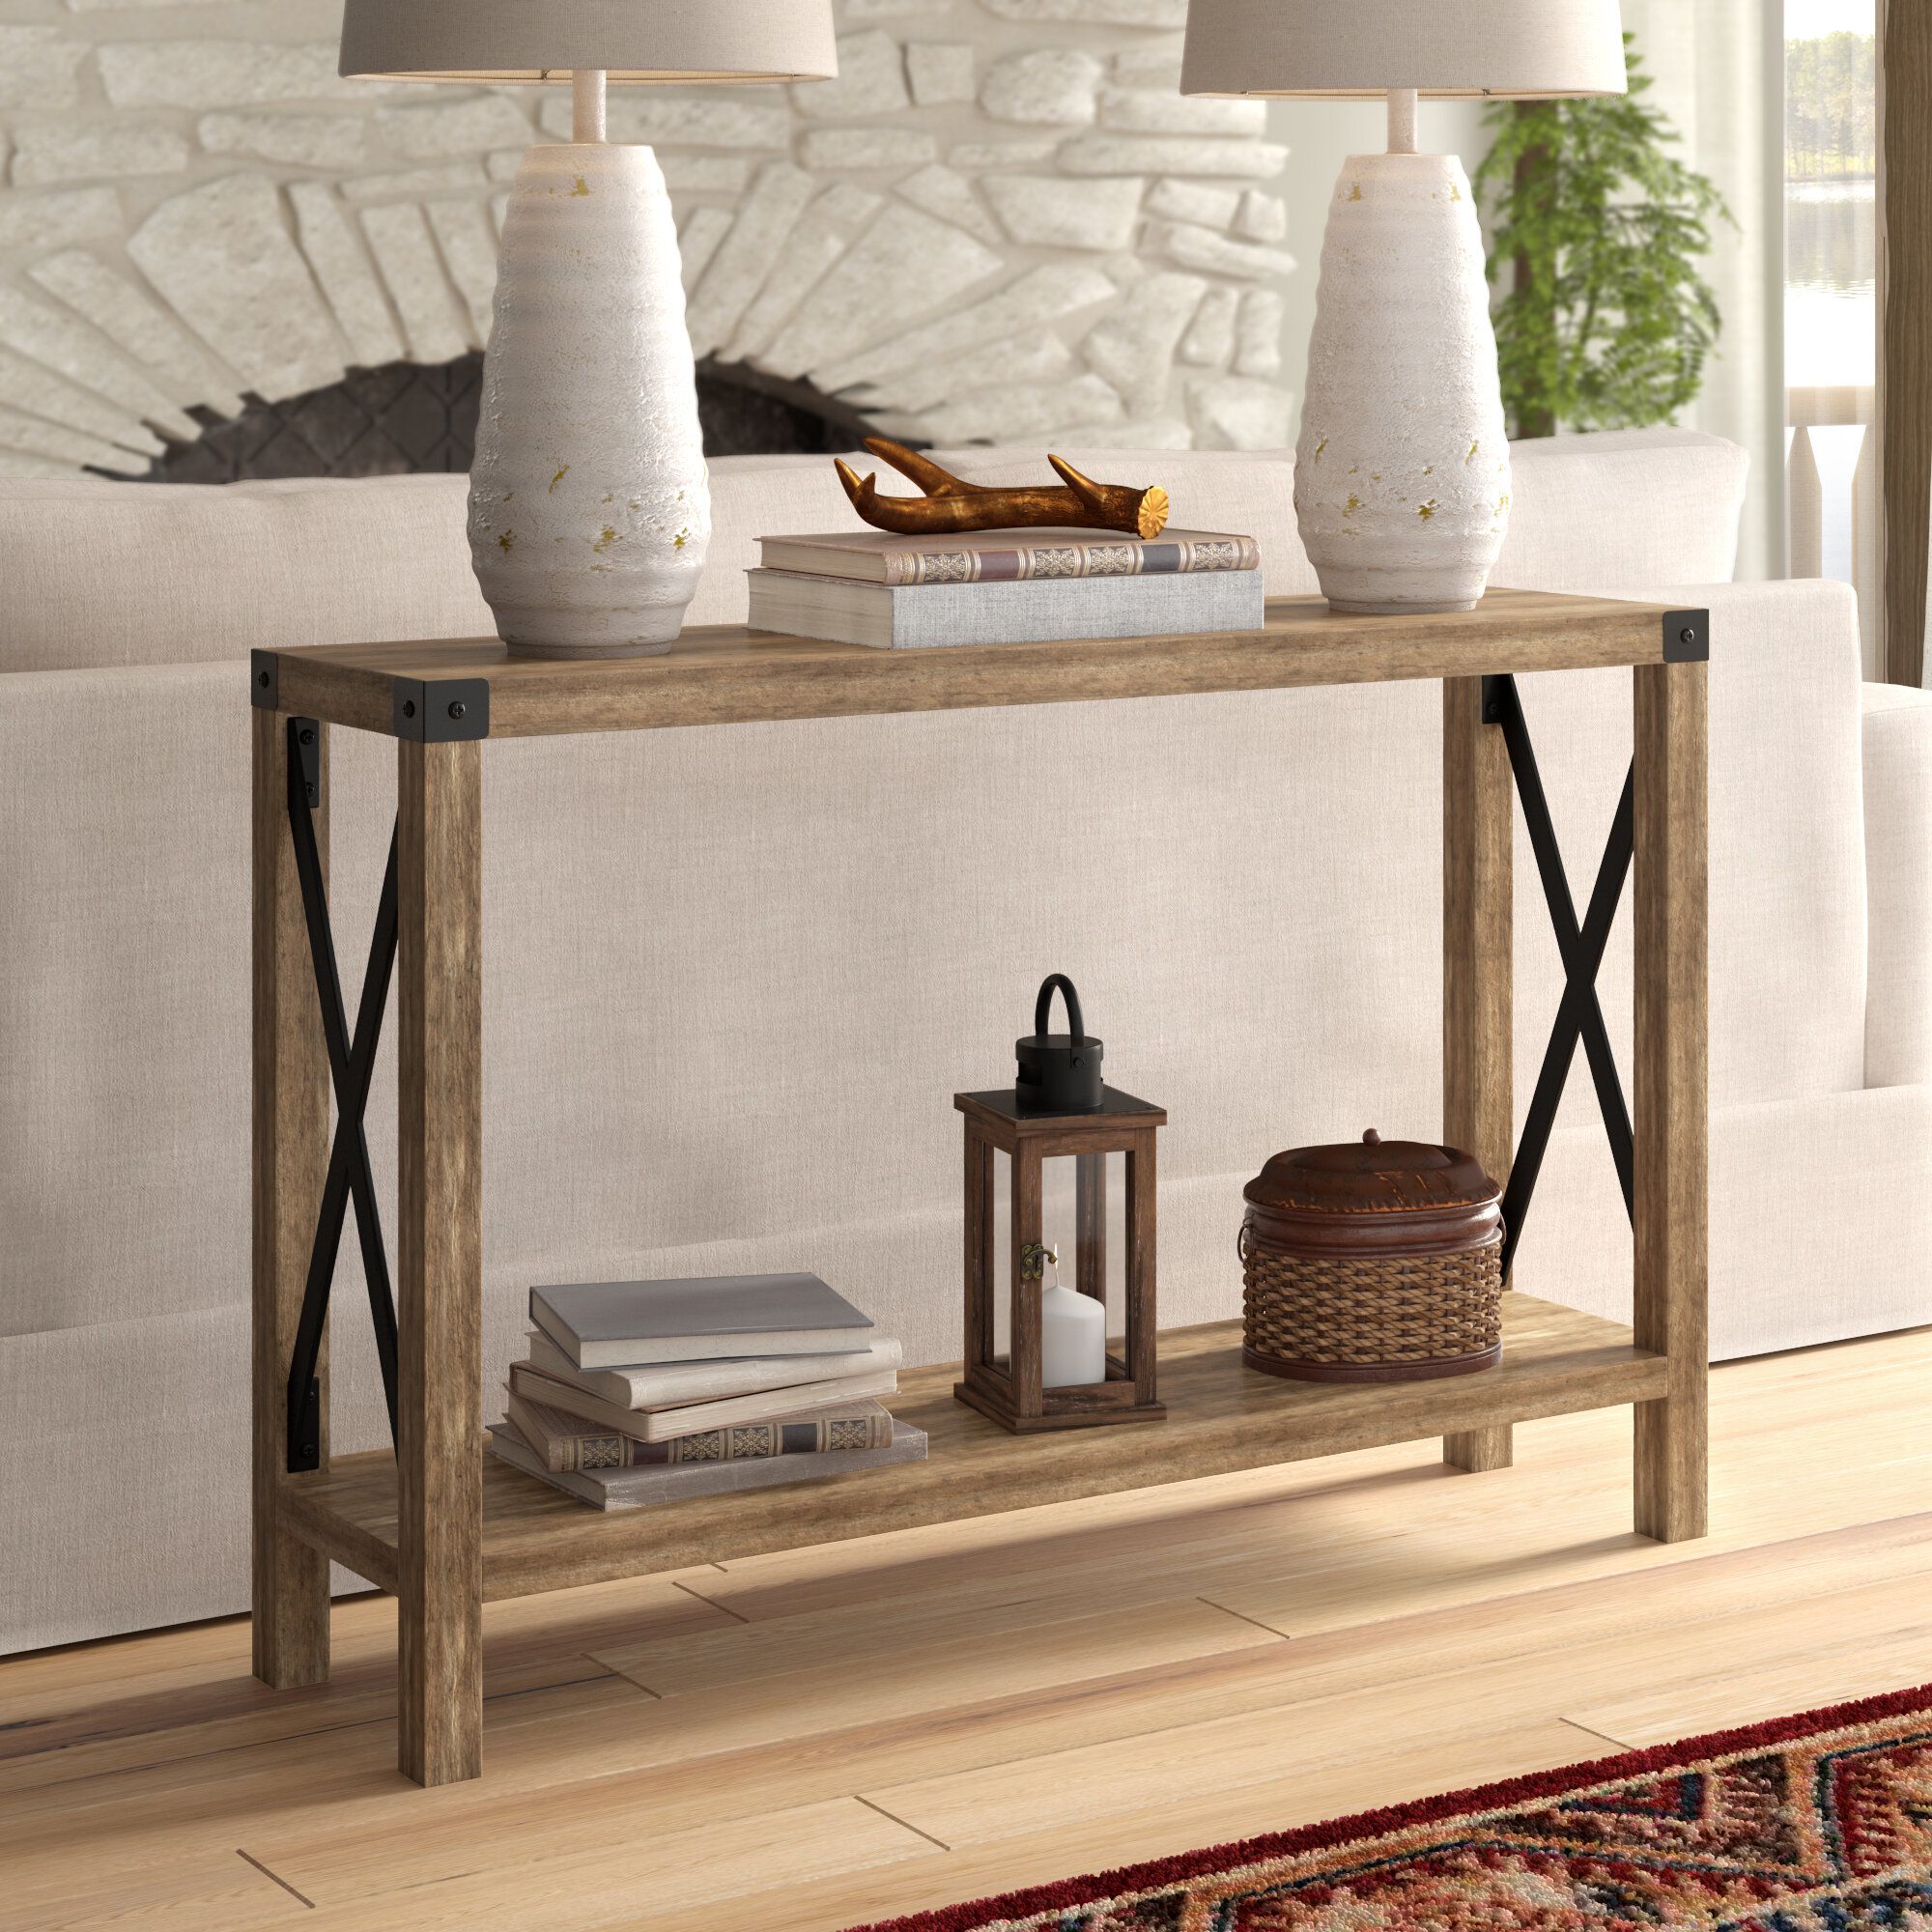 [big Sale] Console Tables With Storage You'll Love In 2021 | Wayfair Regarding 3 Piece Shelf Console Tables (View 15 of 20)